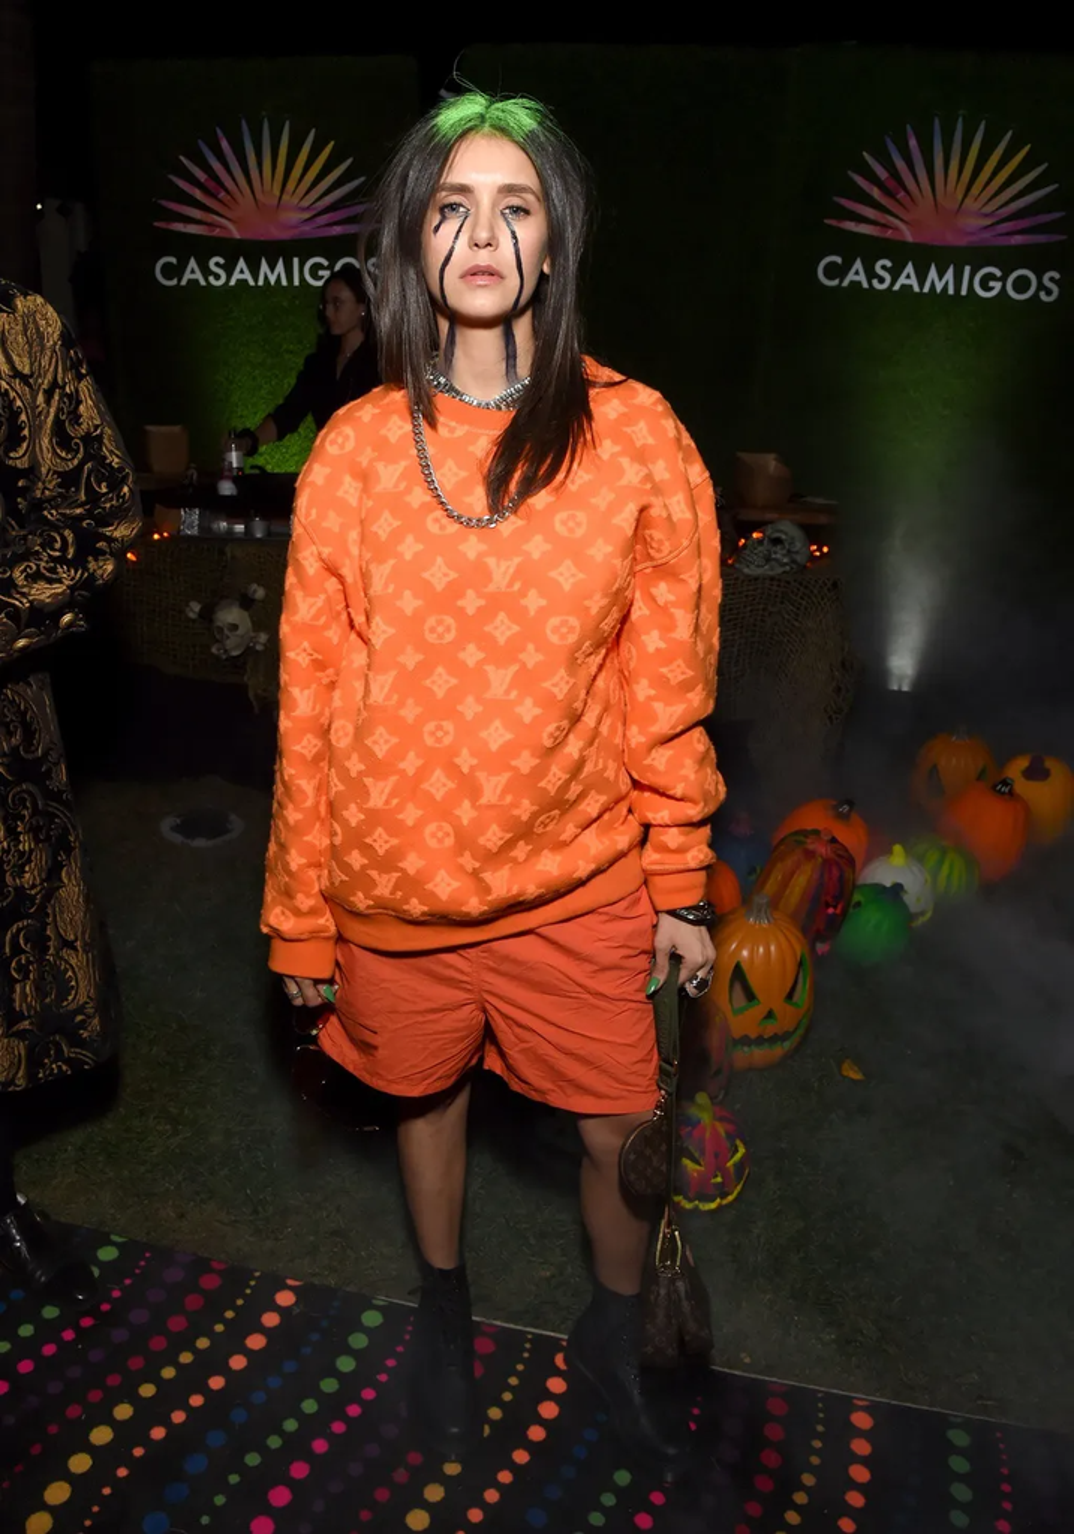 X 上的Harry Styles Lookbook：「At the Casamigos Halloween party